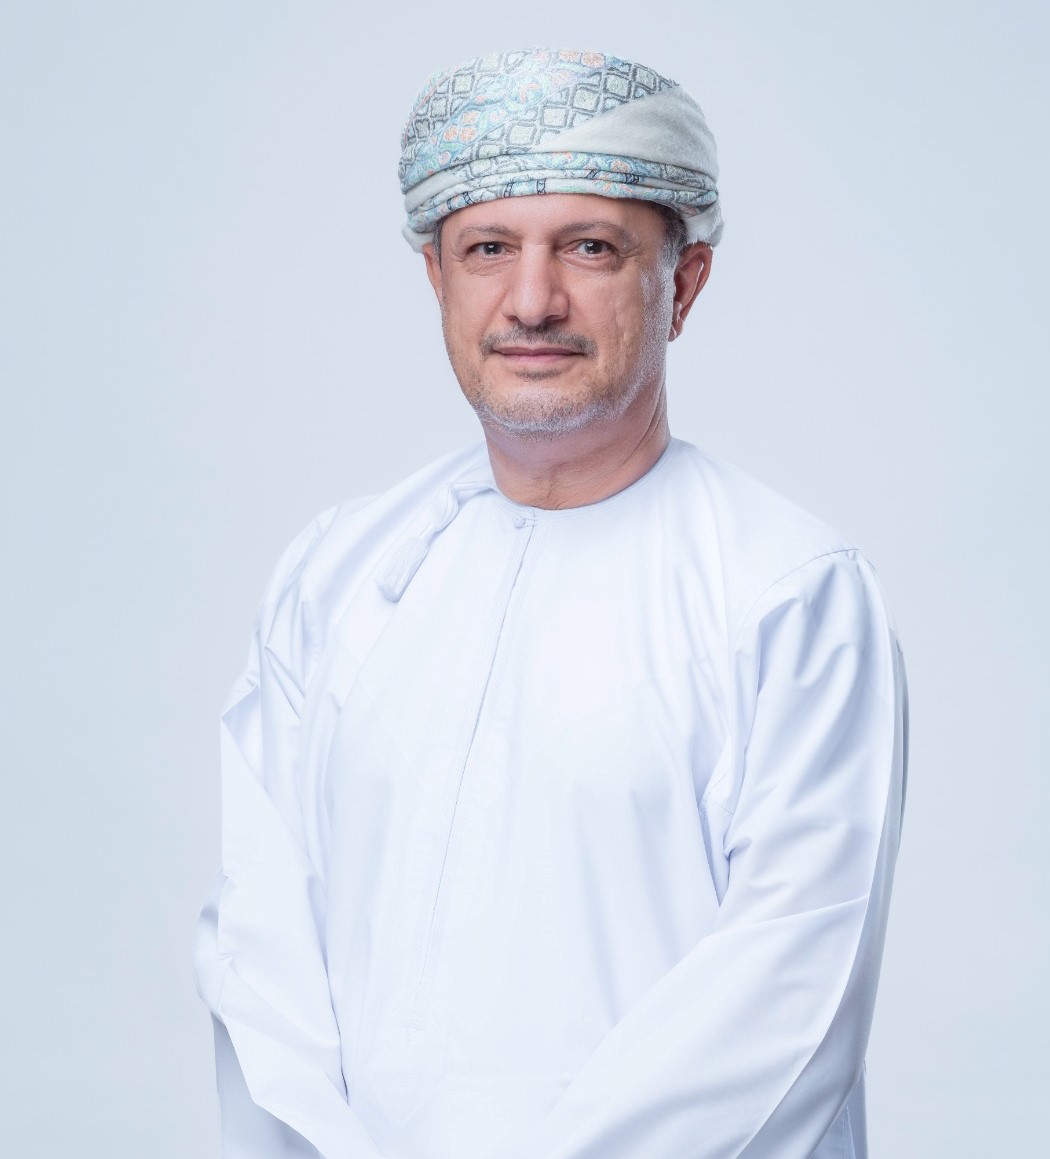 Assets of Oman Investment Authority Increase to RO18 Billion  